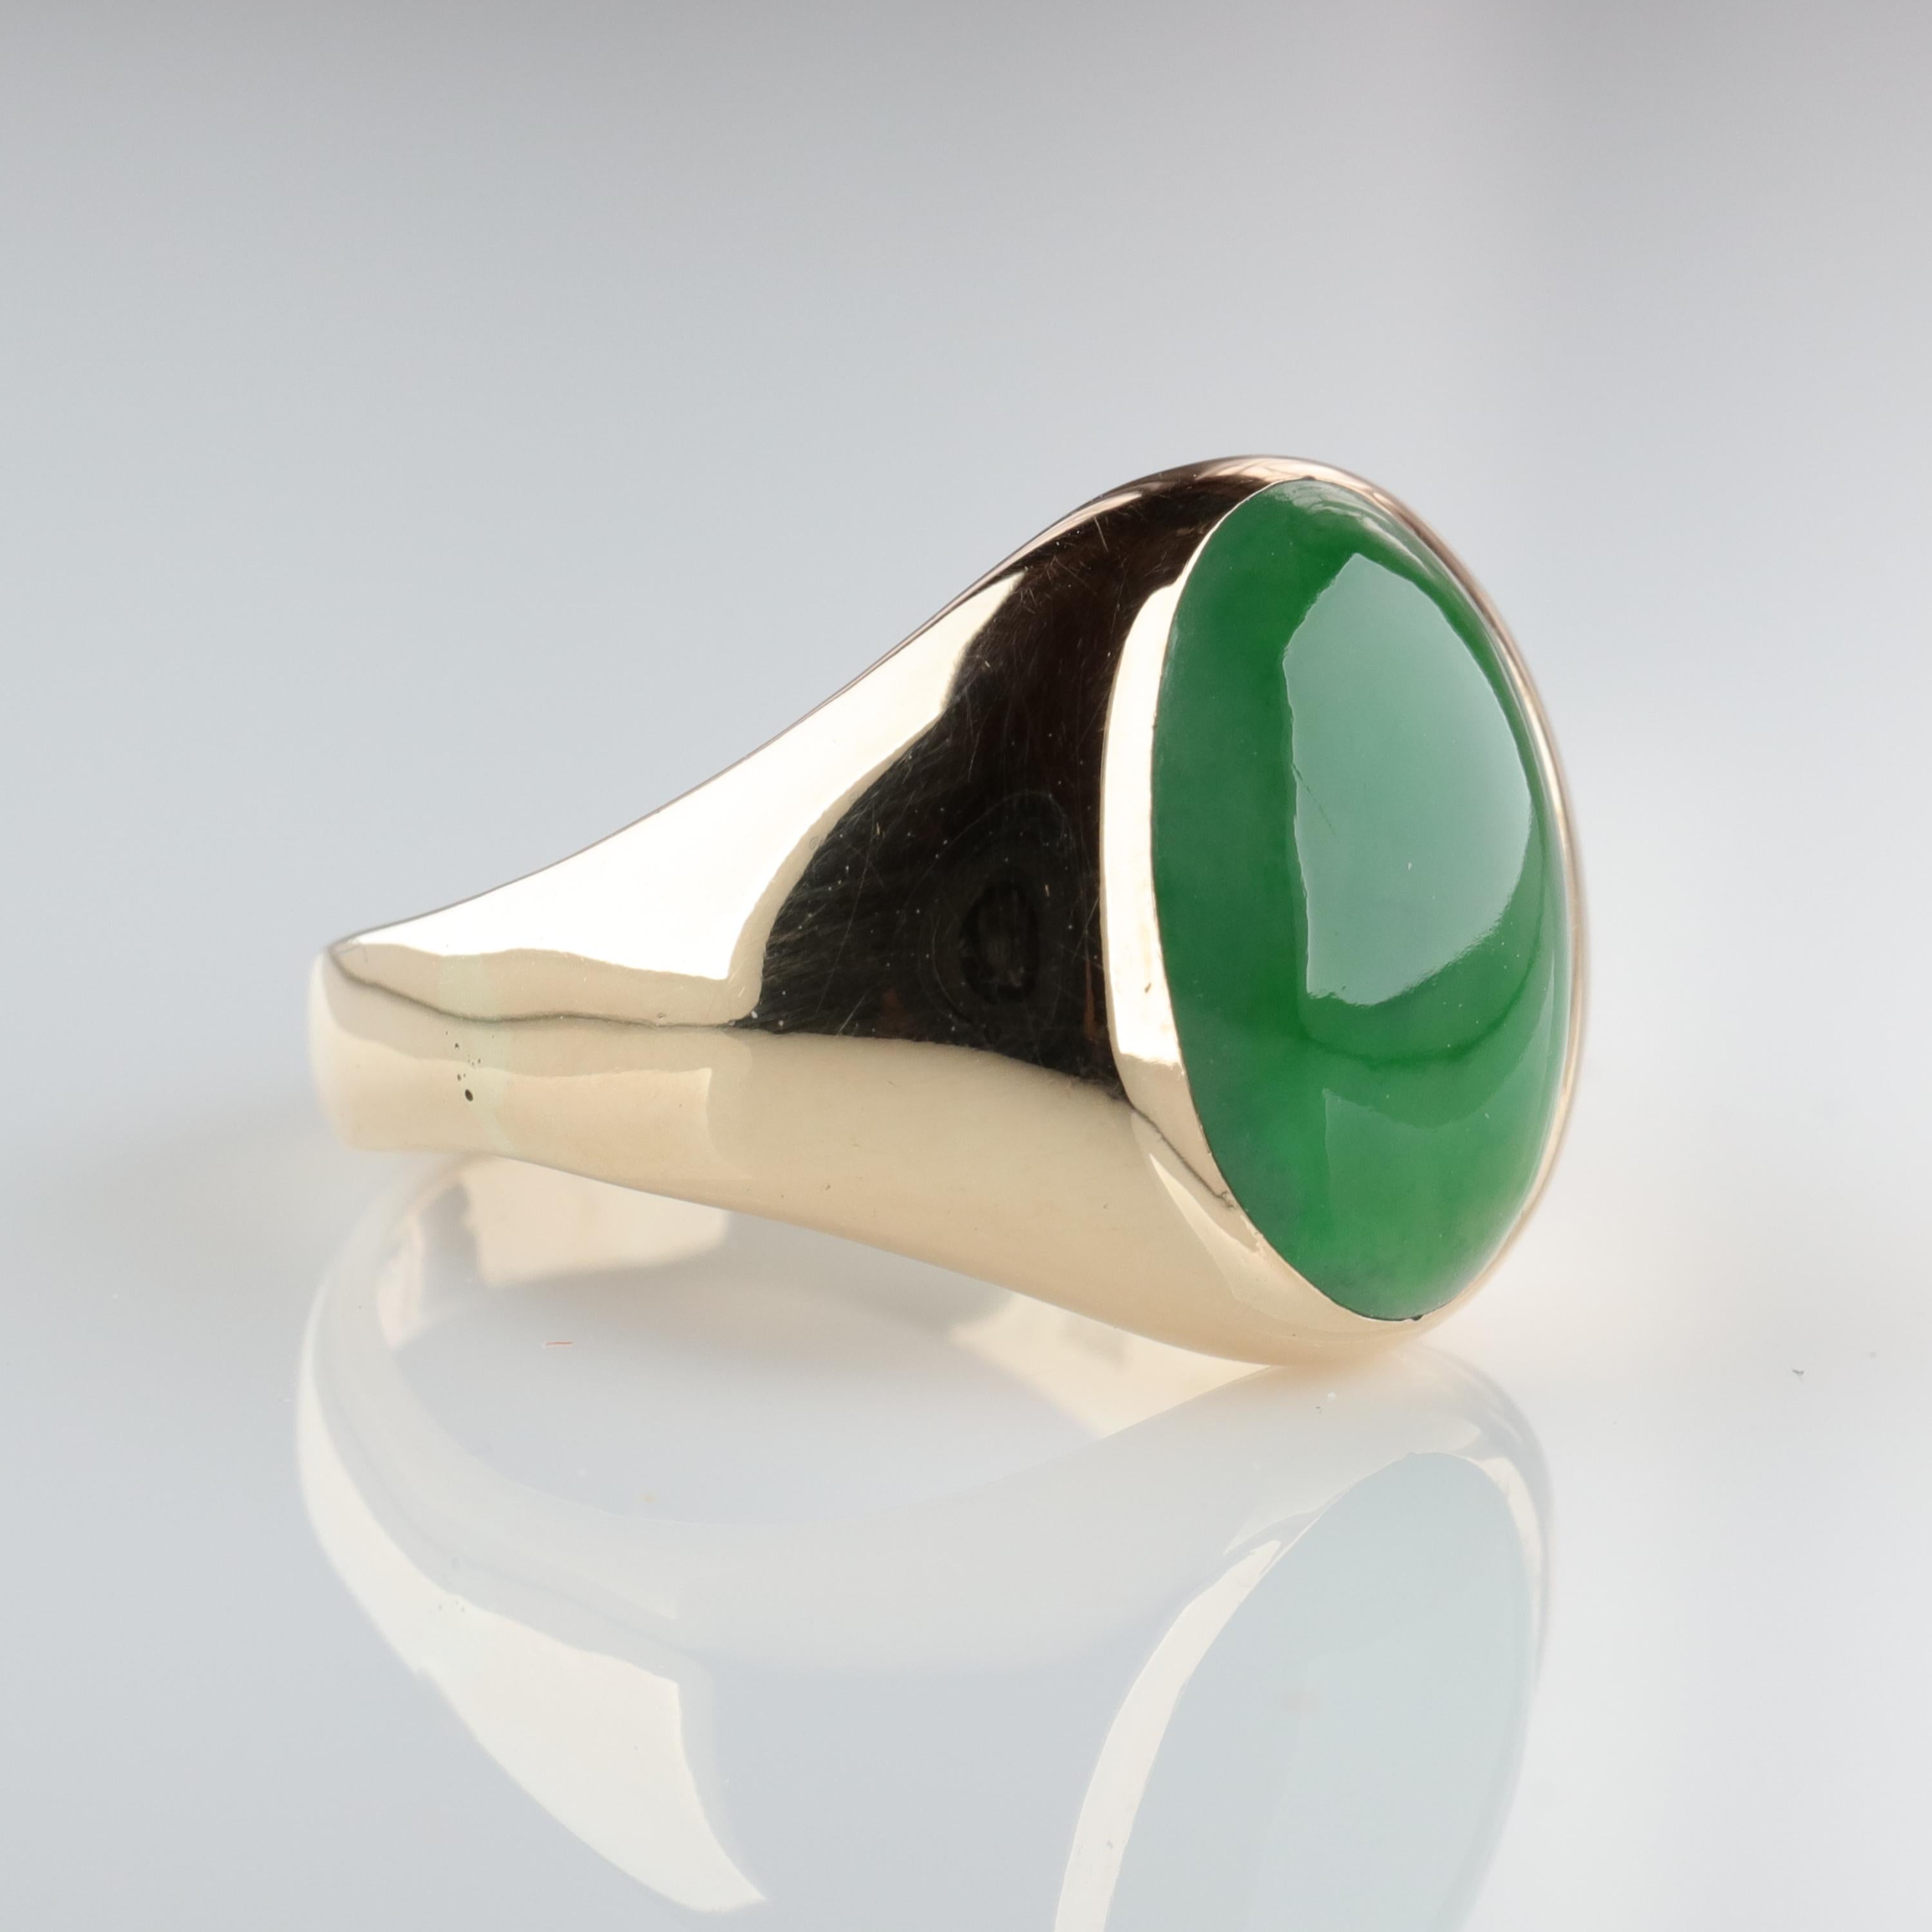 You've heard of Jadeite jade. You've heard of nephrite jade. Have you heard of Omphacite jade? Probably not. As the technology we use in gemology advances, so too does our knowledge. Many of the fine imperial jade pieces long believed (and GIA